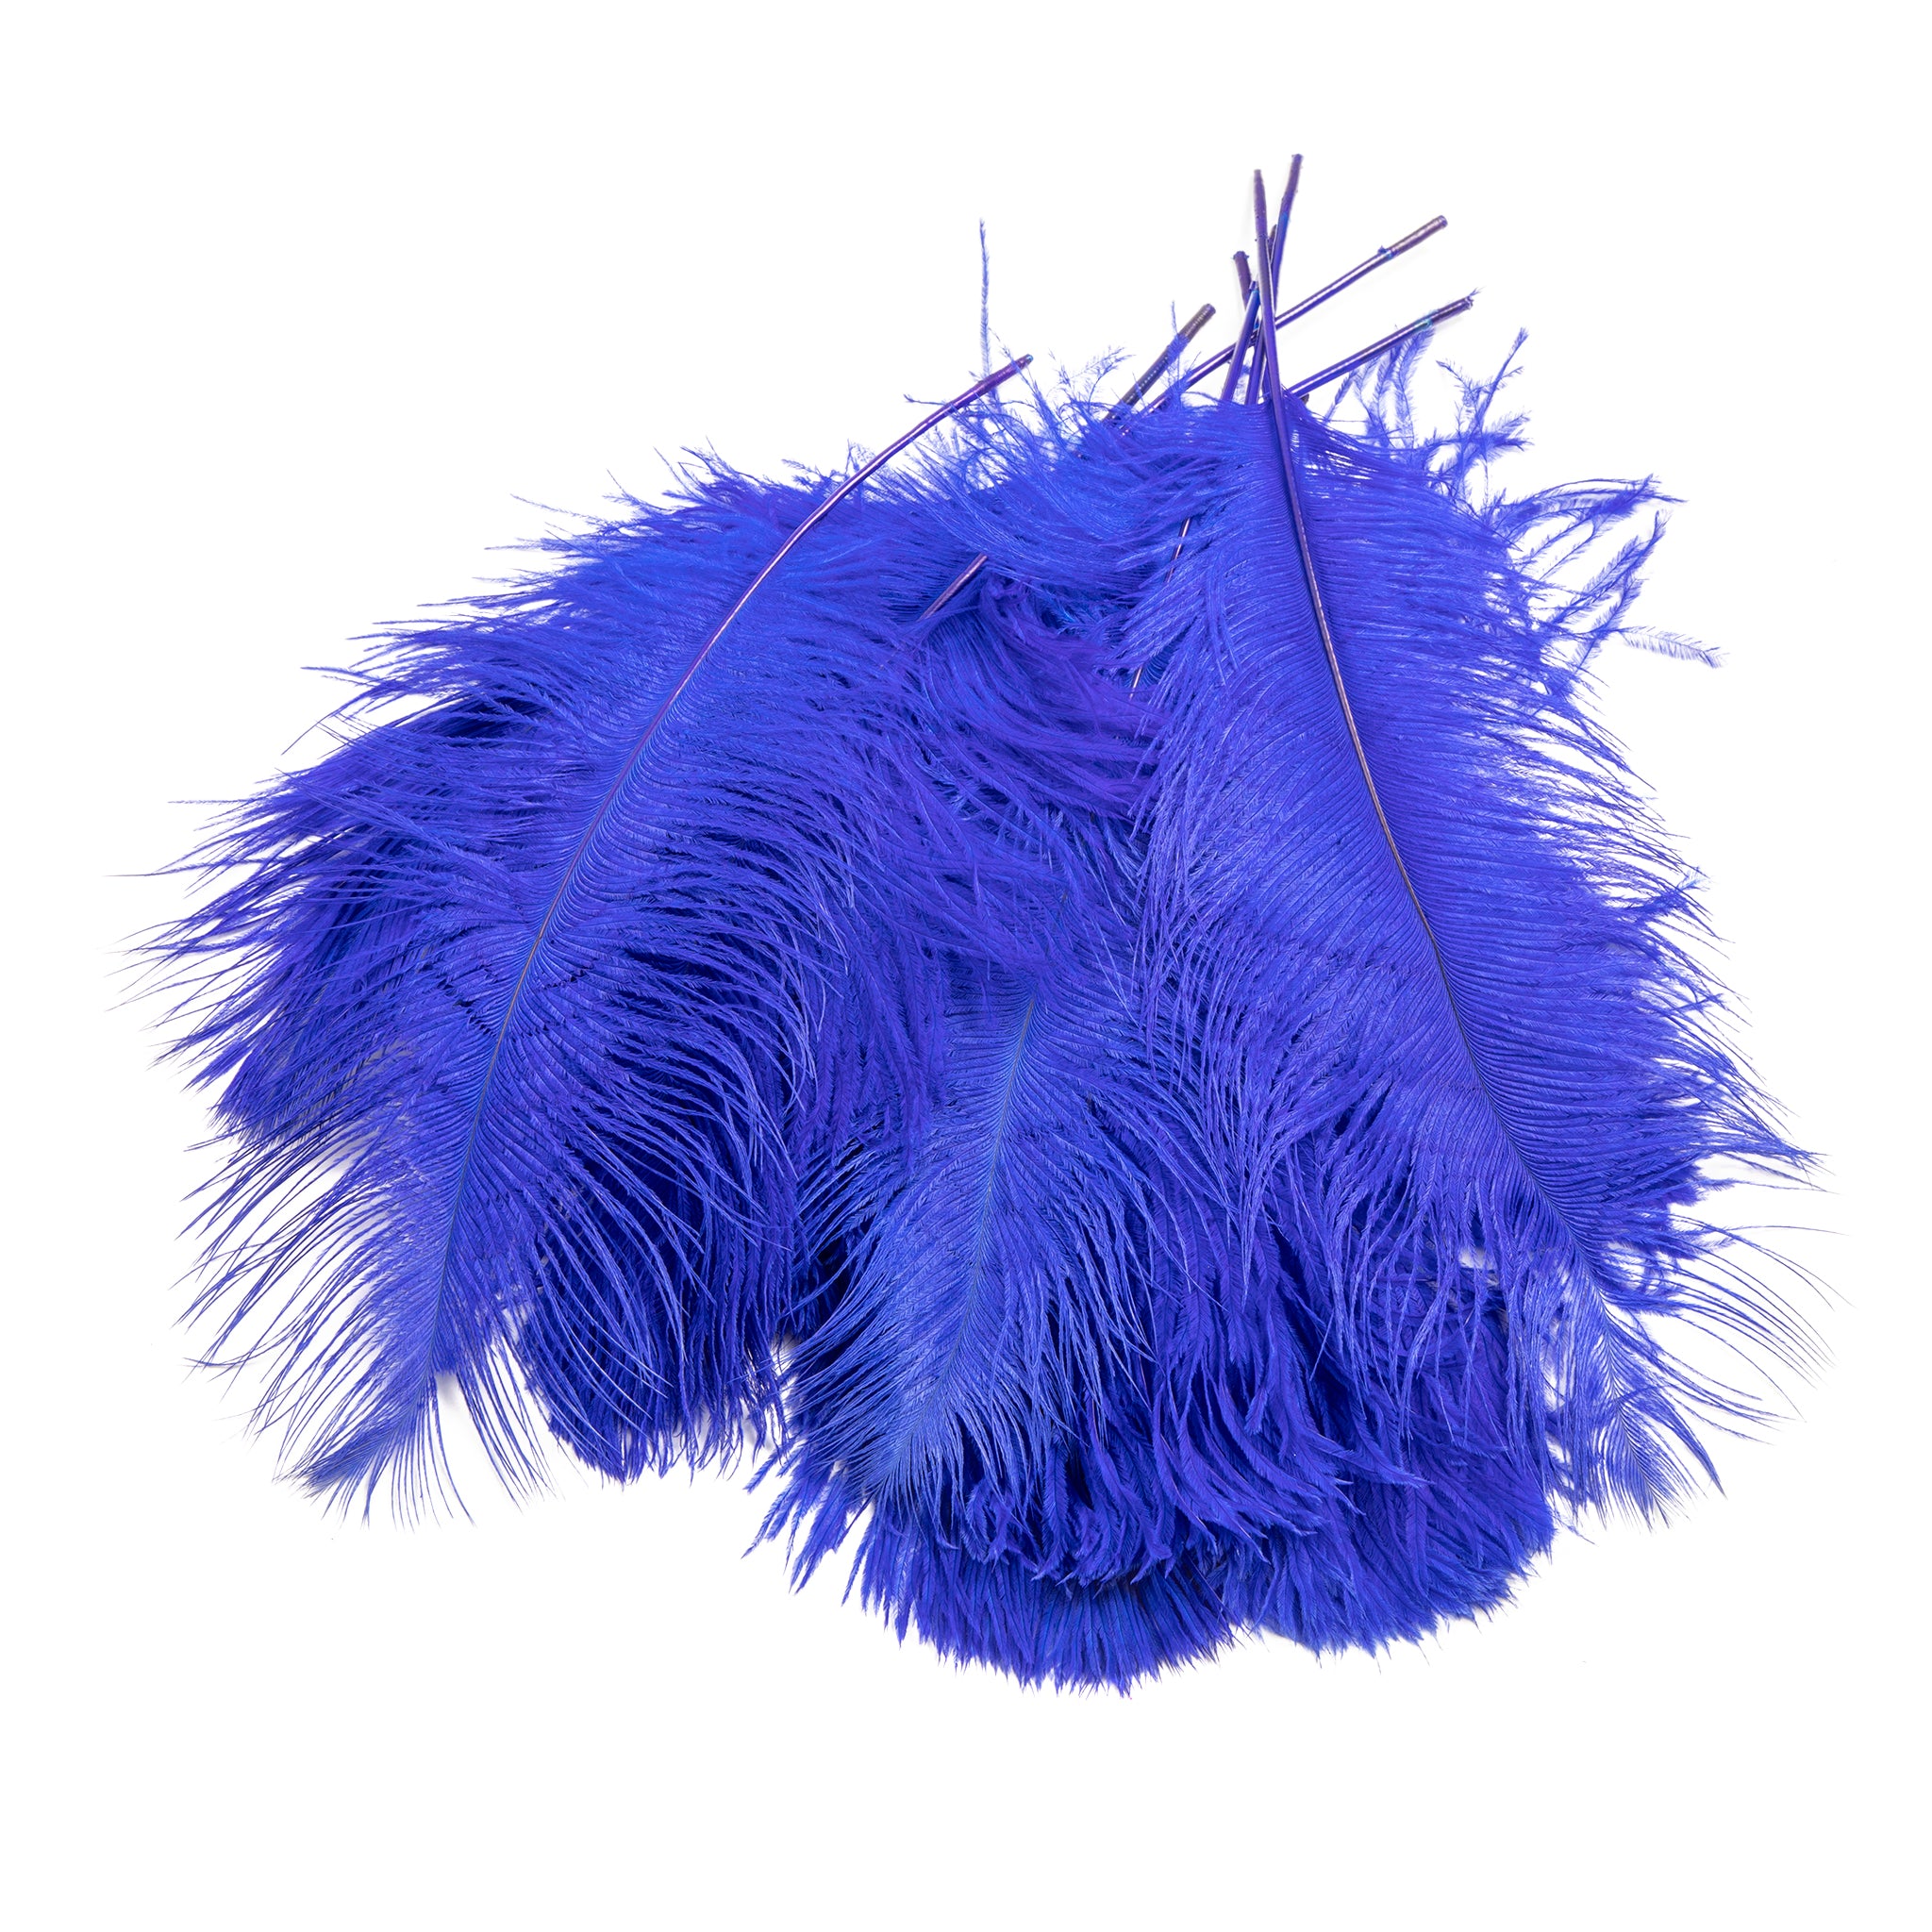 BULK 1/2lb Ostrich Feather Tail Plumes 15-20 (Baby Blue) for Sale Online